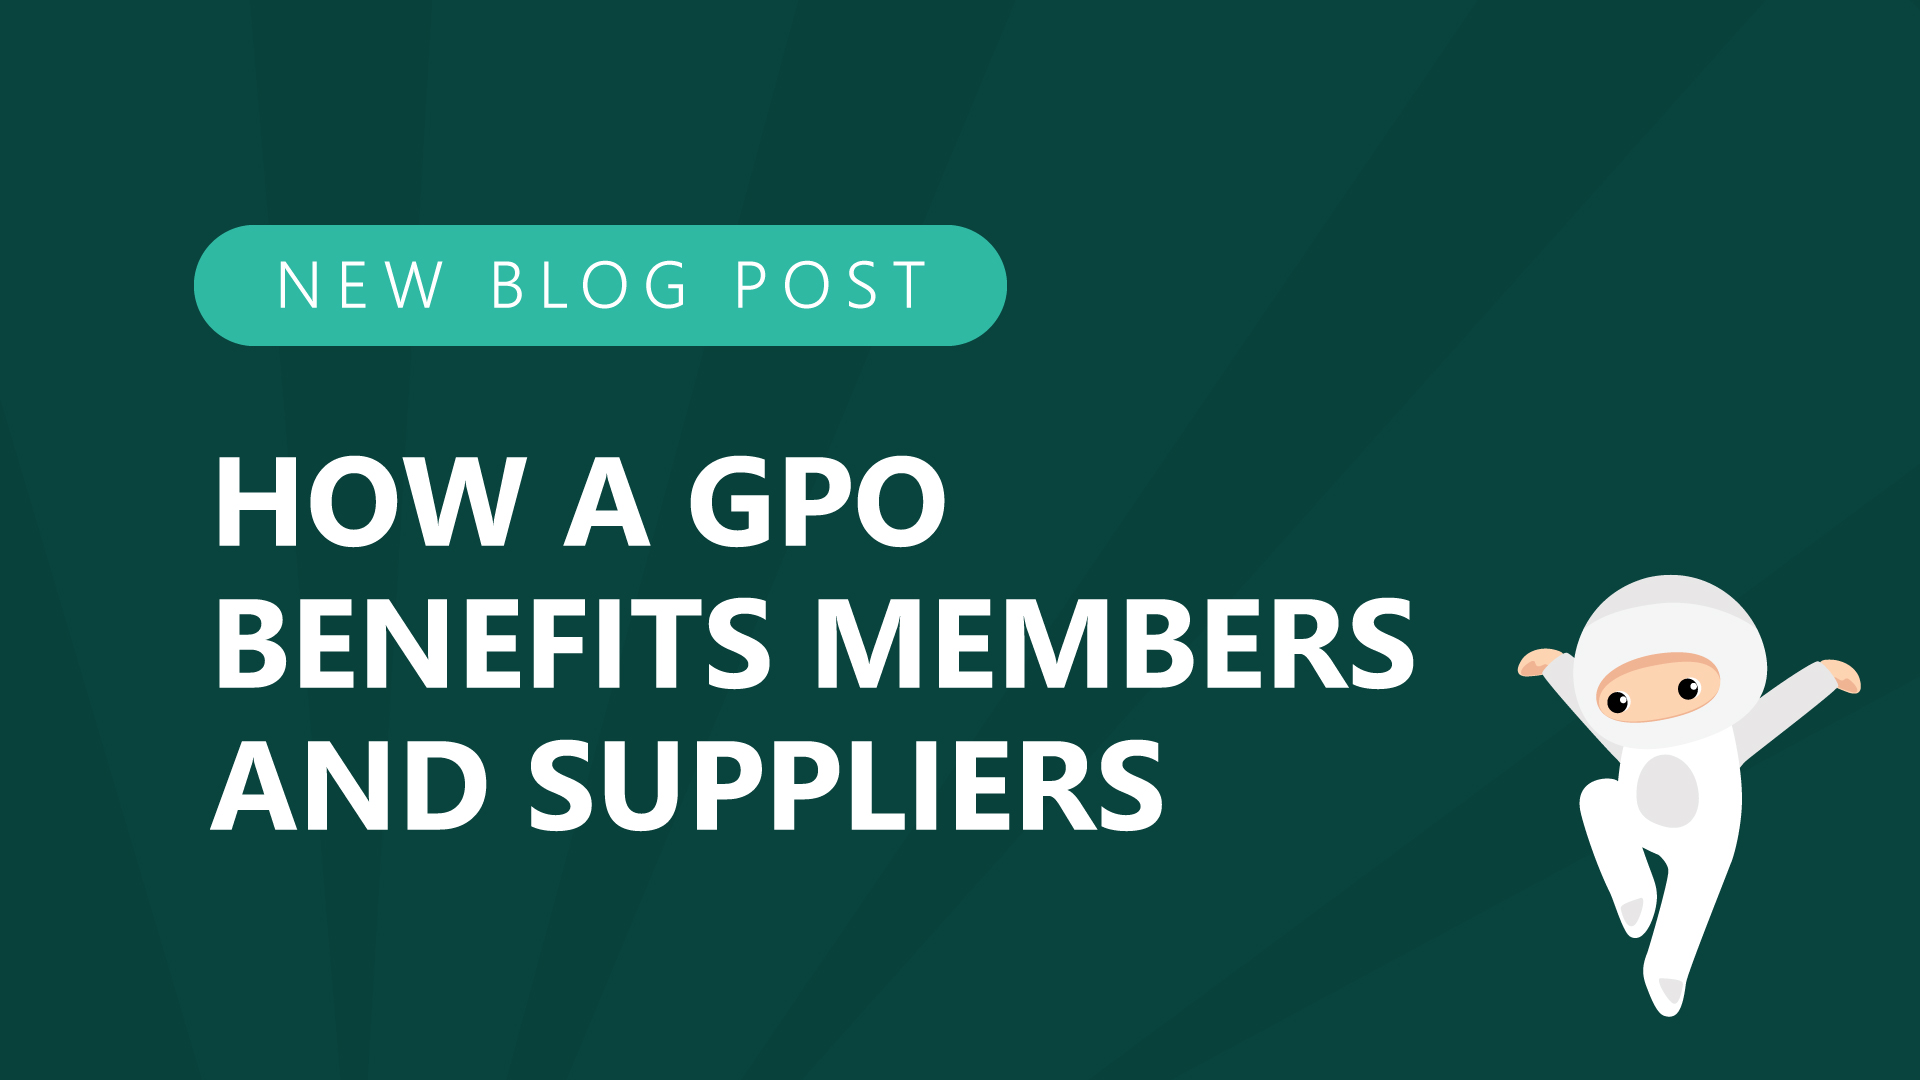 52-How-a-GPO-Benefits-Members-AND-Suppliers.jpg